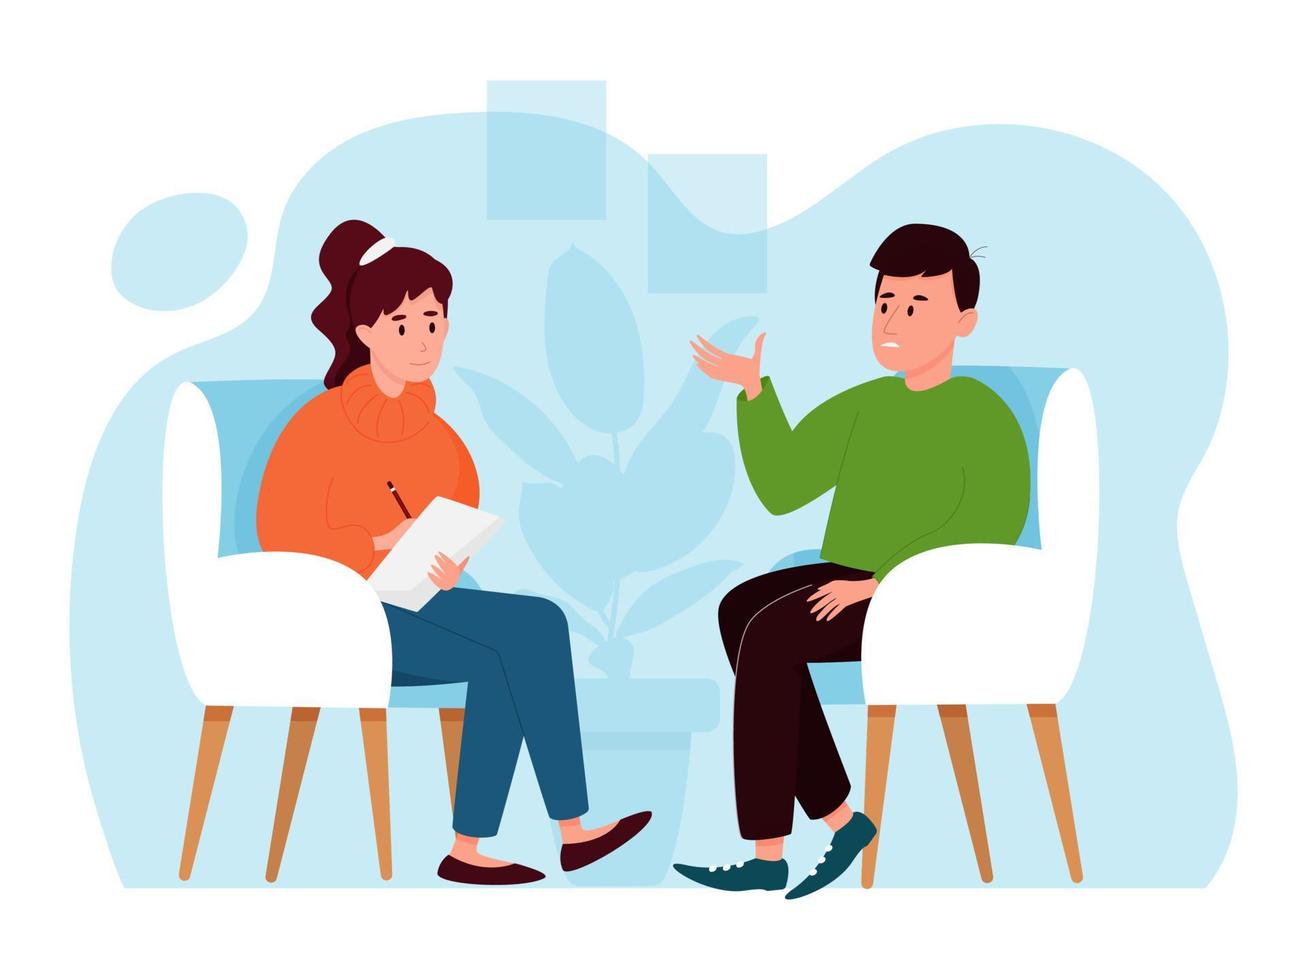 Psychotherapy session. A man tells a psychologist about his problems. Mental health concept. Vector illustration